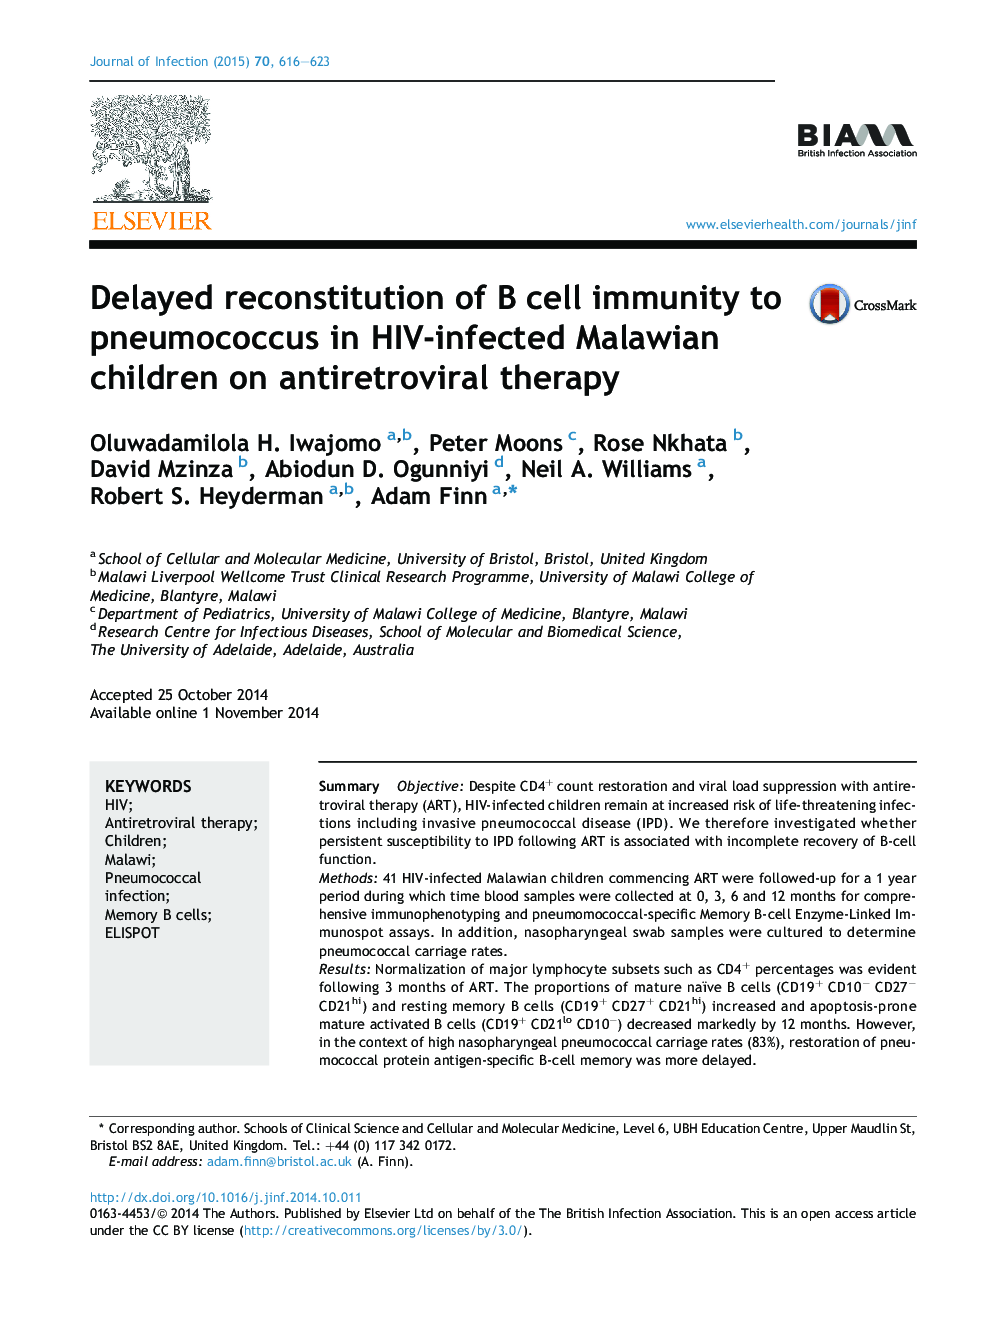 Delayed reconstitution of B cell immunity to pneumococcus in HIV-infected Malawian children on antiretroviral therapy